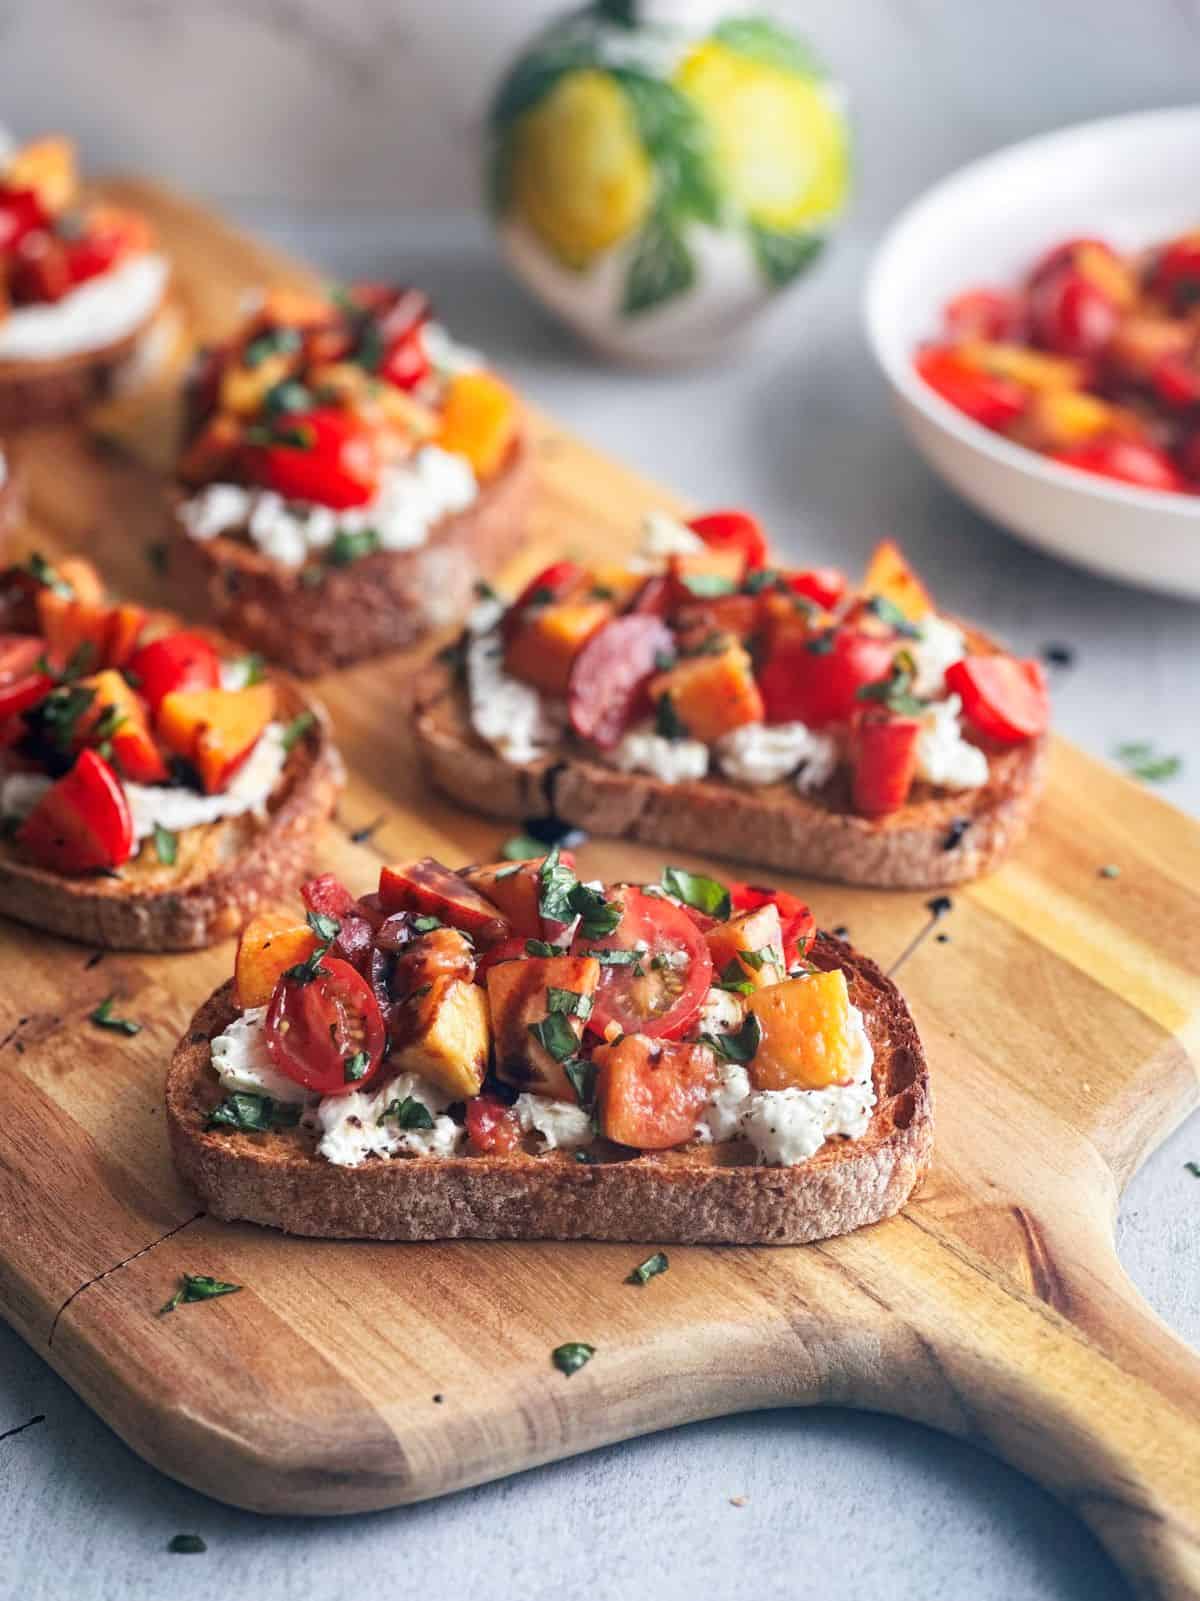 Peach and tomato burrata bruschetta on a wooden board with a bowl of peaches and tomatoes in the background.